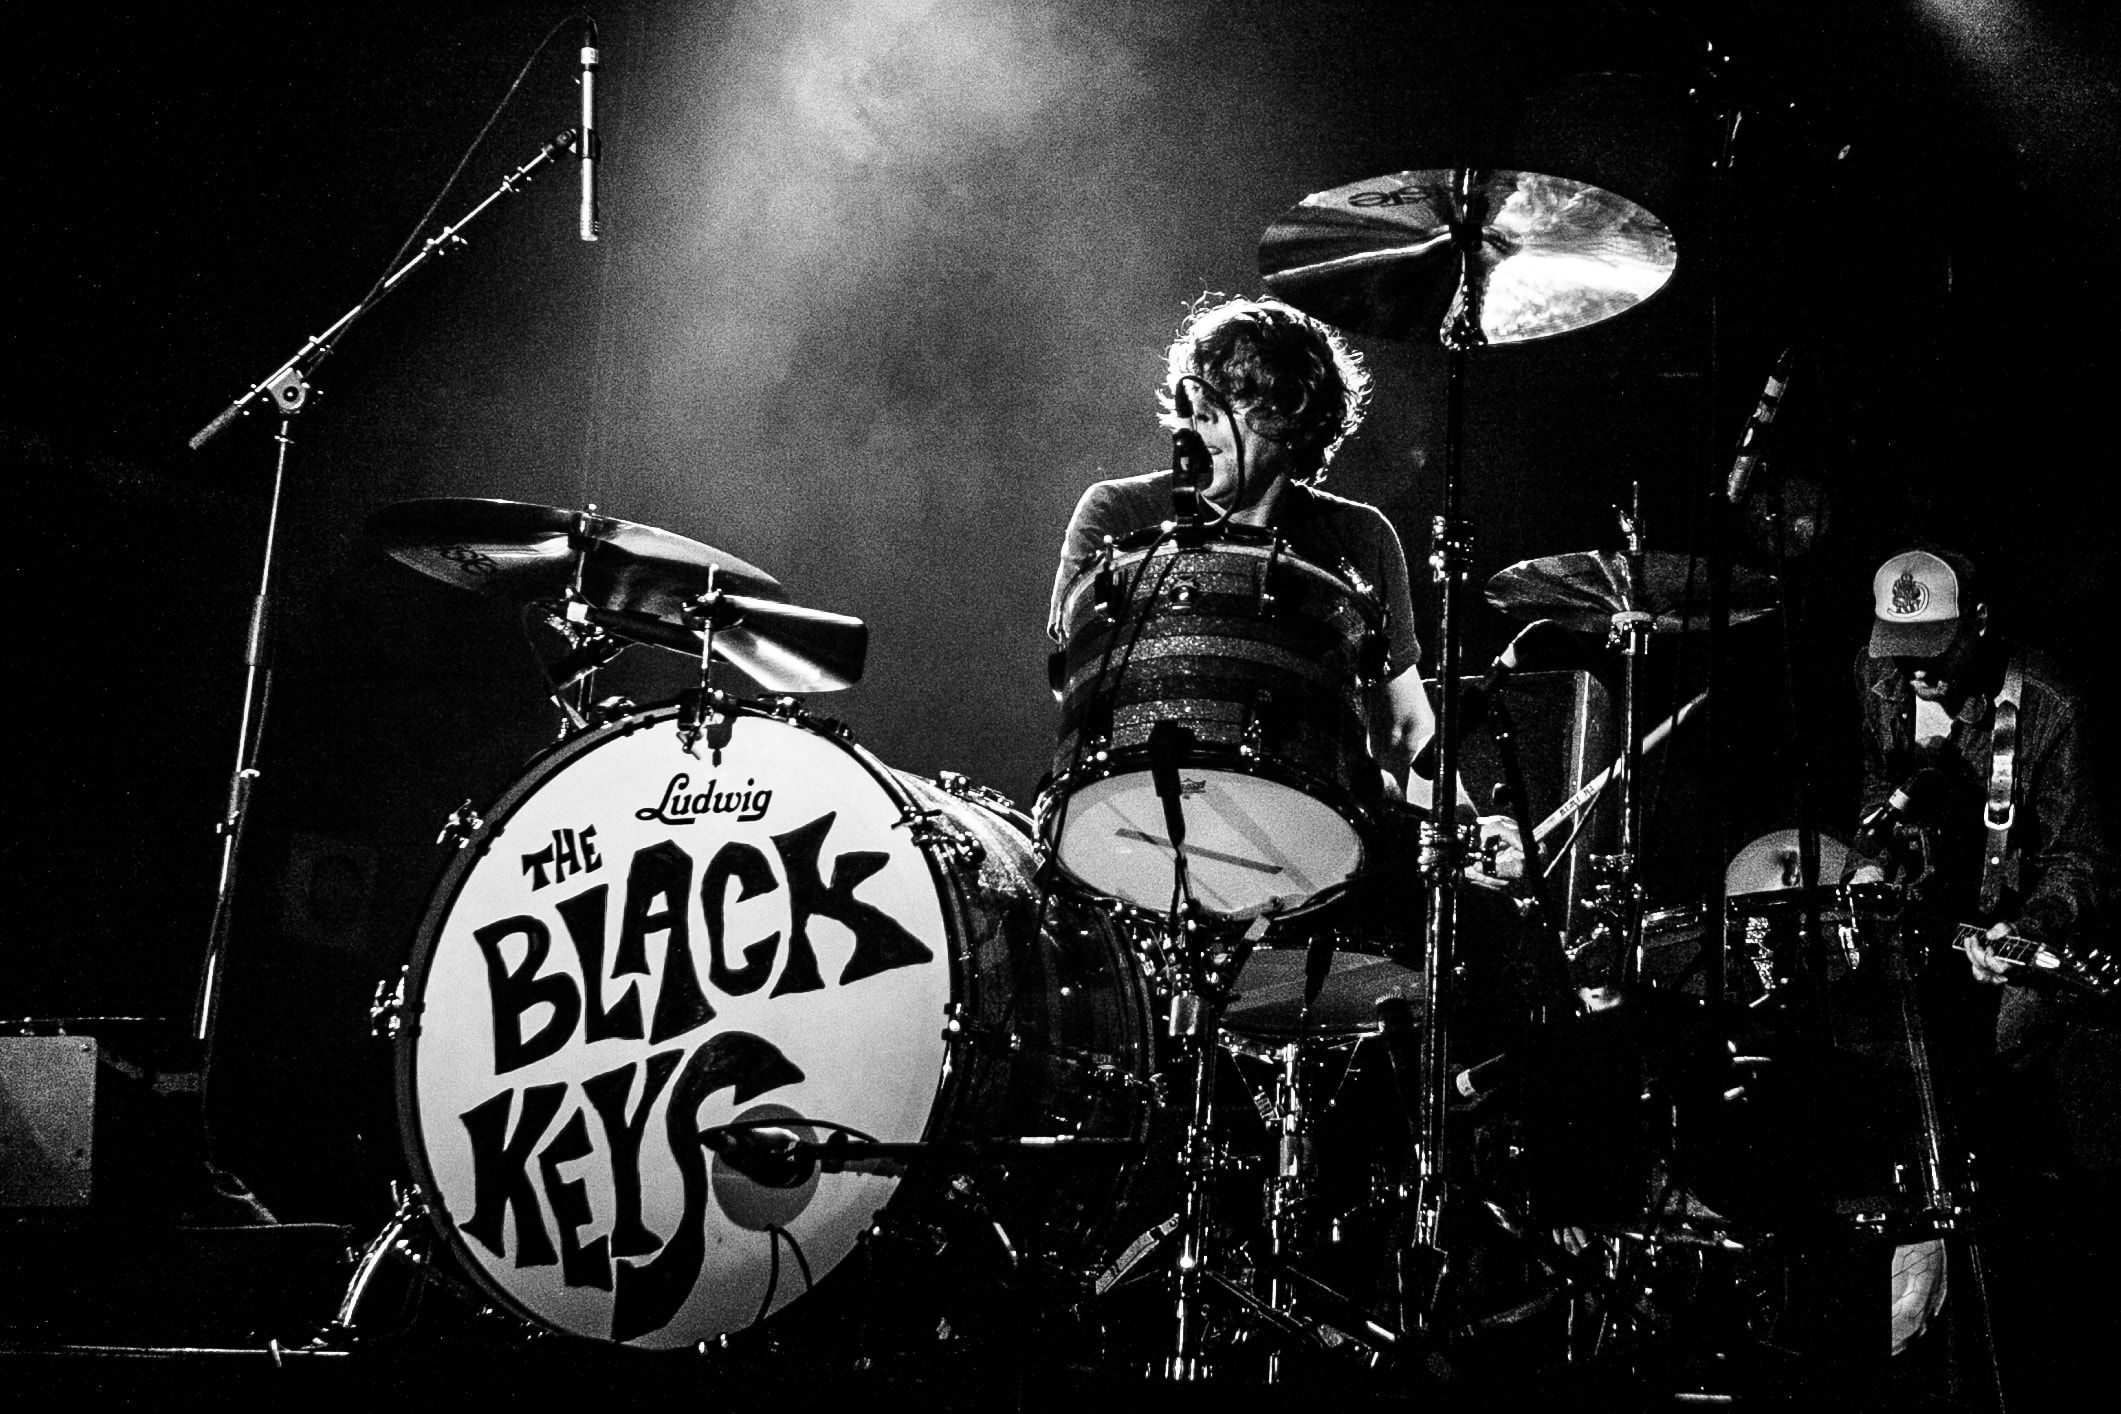 The Black Keys wallpapers, Top free backgrounds, Captivating visuals, Reflecting the band's unique sound, 2130x1420 HD Desktop